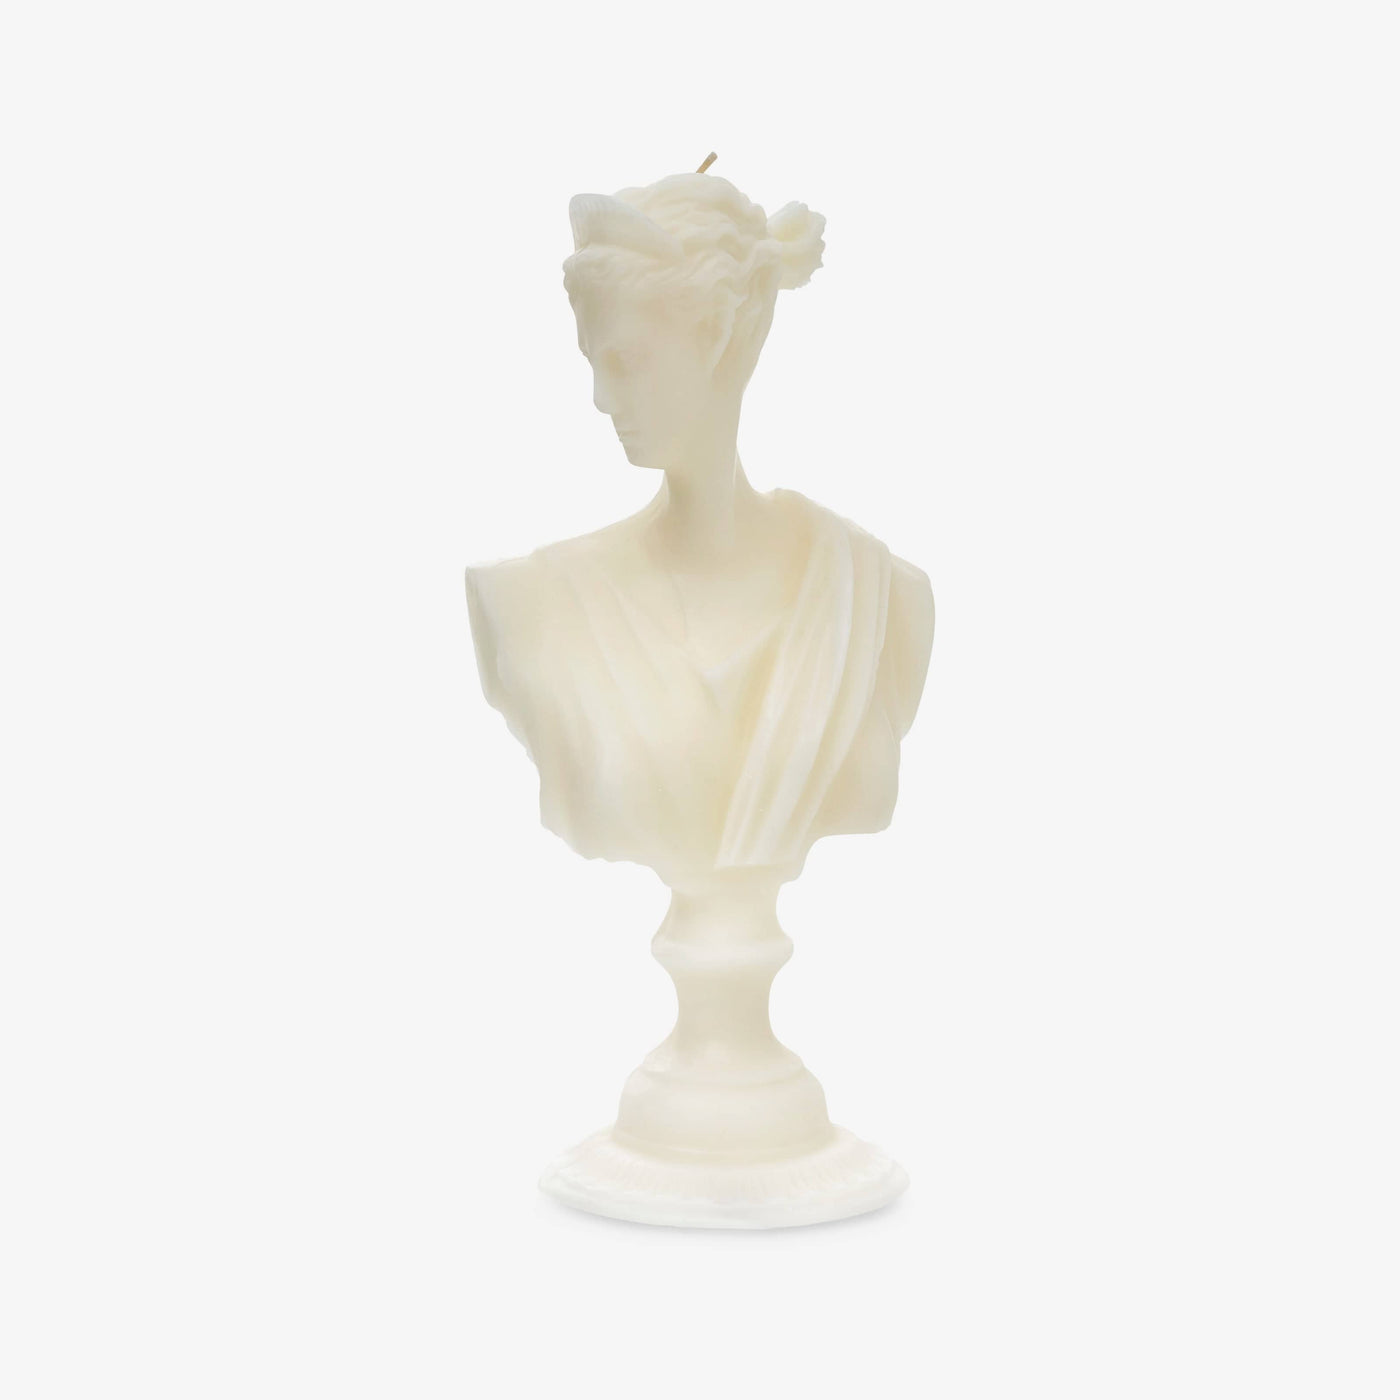 Artemis Diana Bust Candle, White, 650 g 1